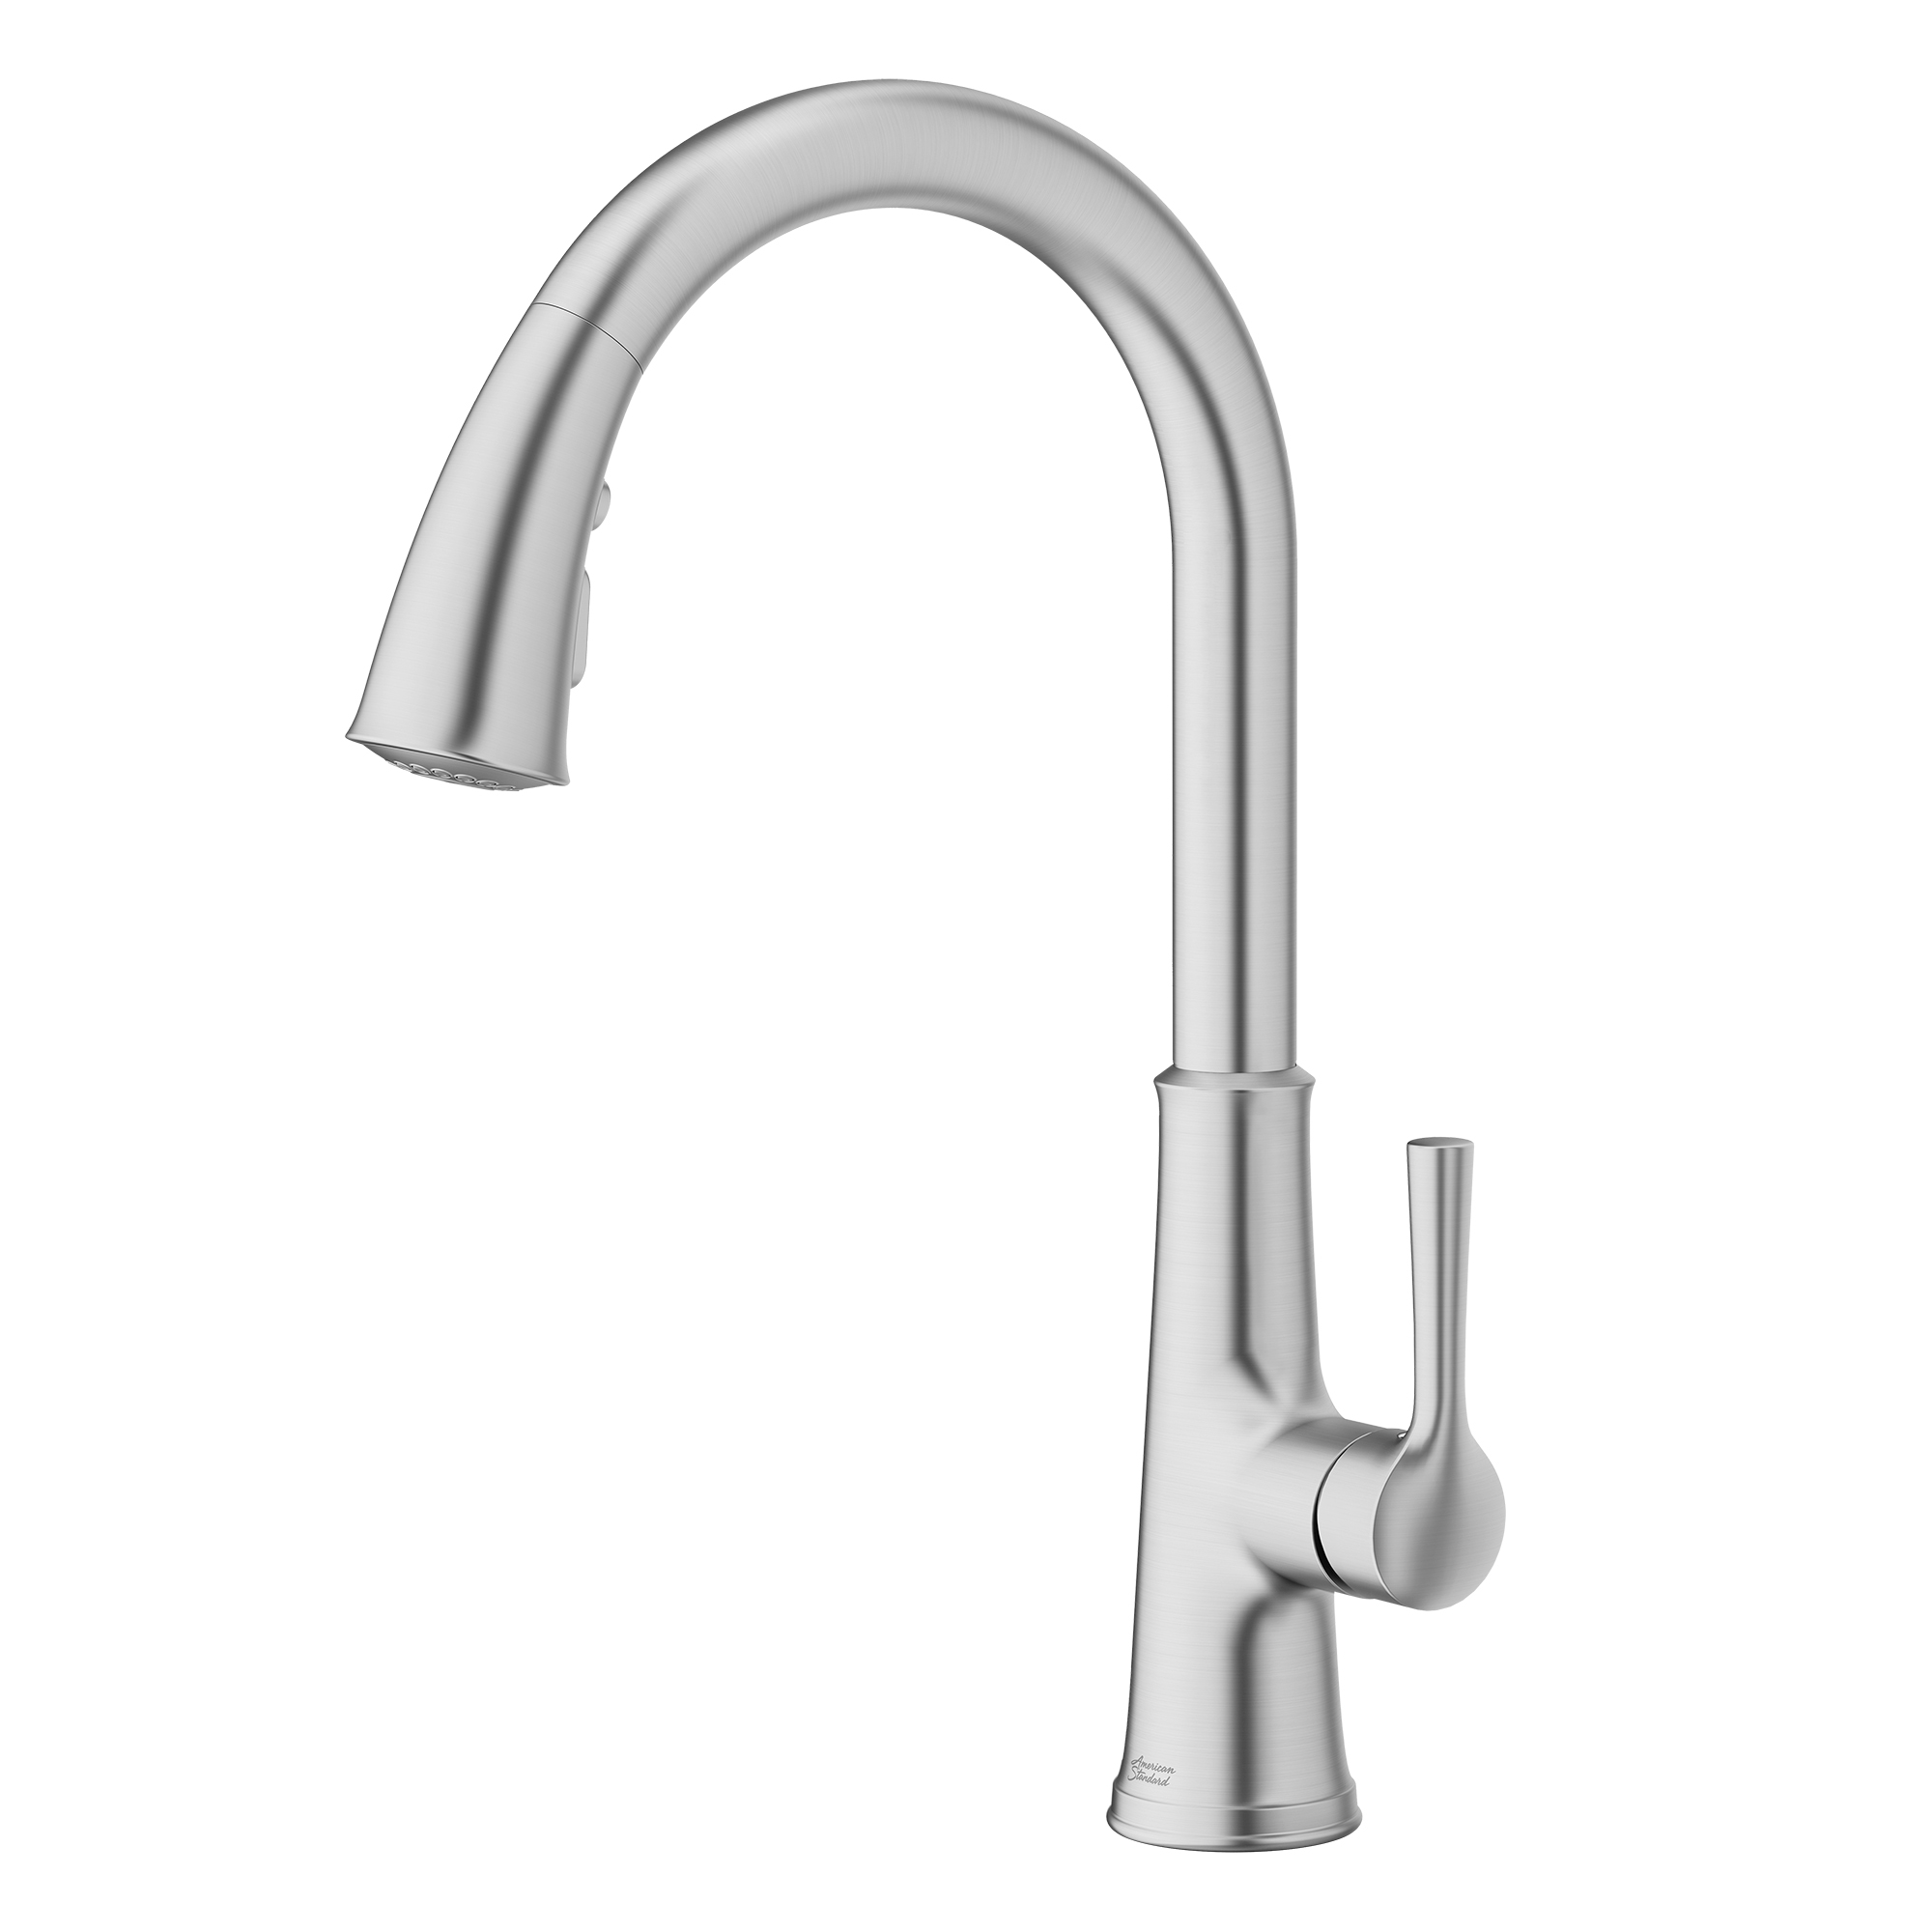 Renate™ Single-Handle Pull-Down Dual Spray Kitchen Faucet 1.5 gpm/5.7 Lpm